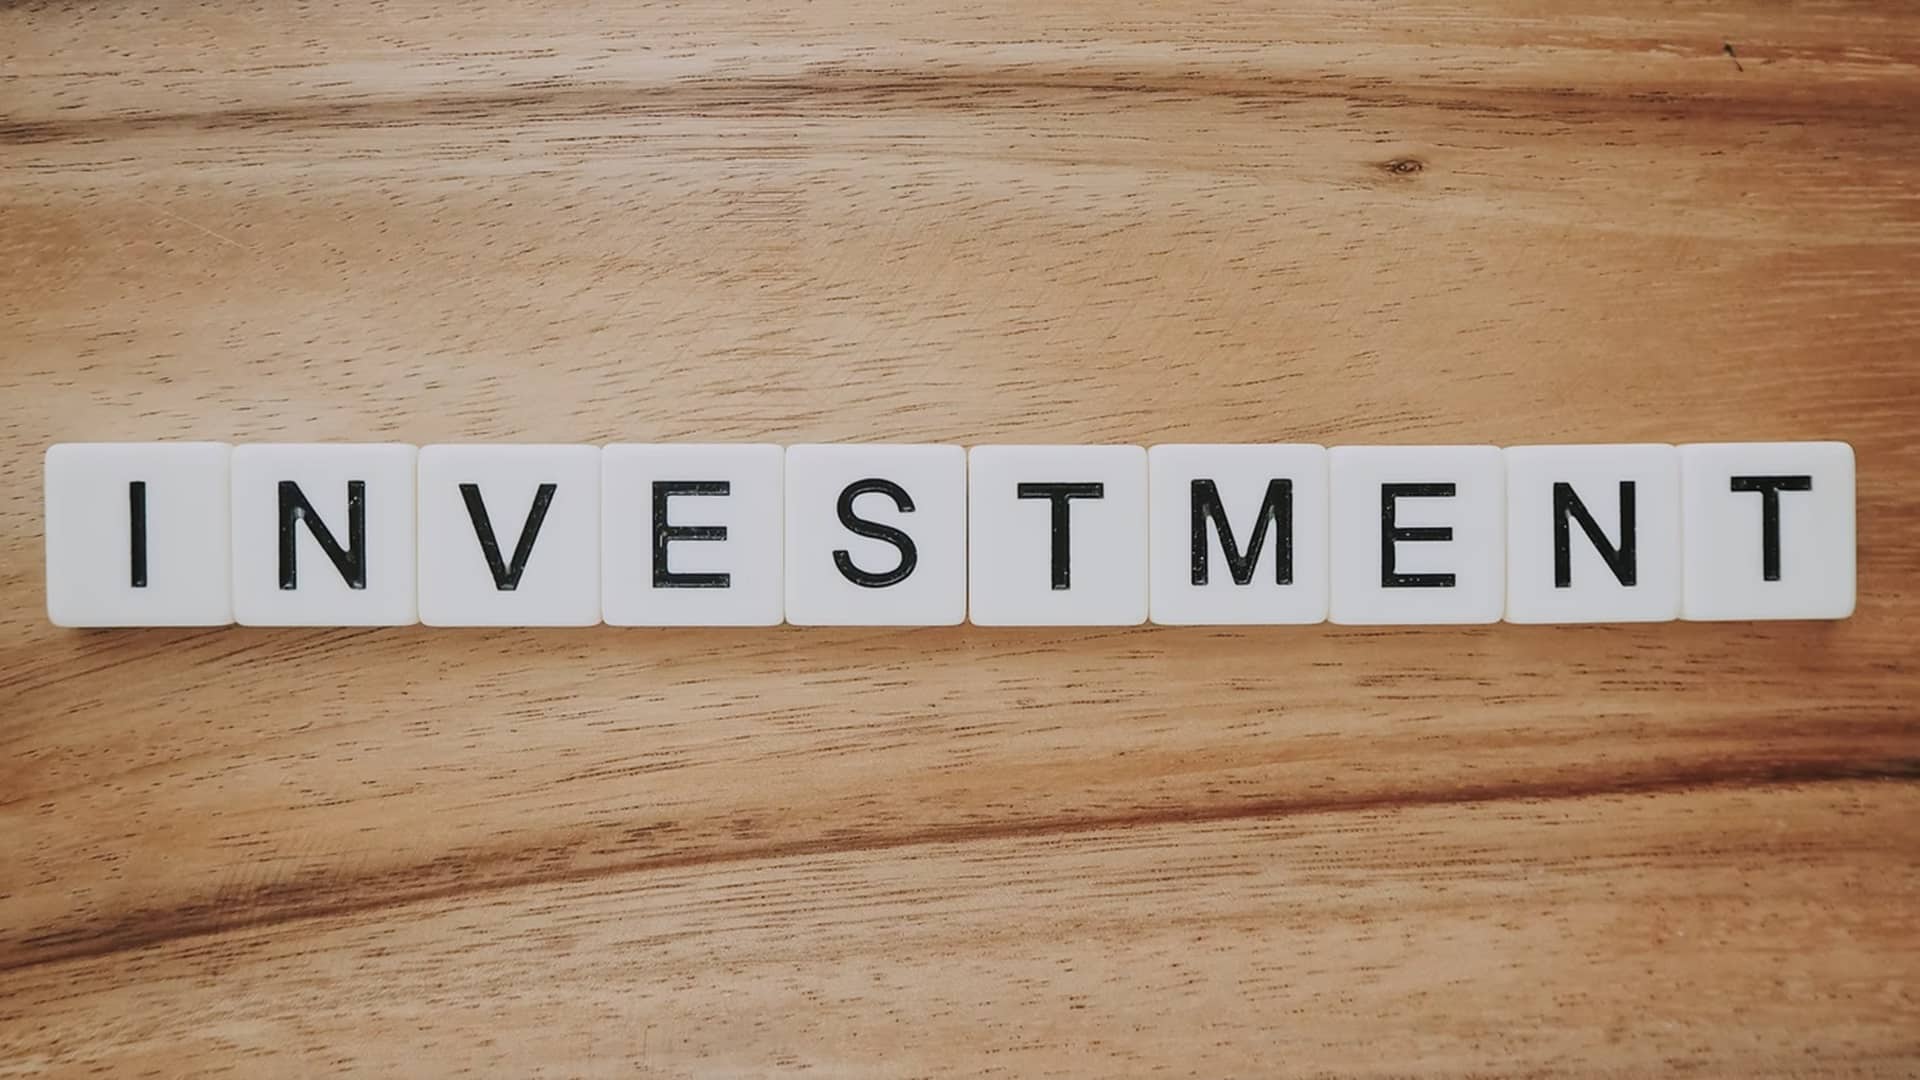 Weekly funding roundup: venture investments cross $0.6B in second week of January